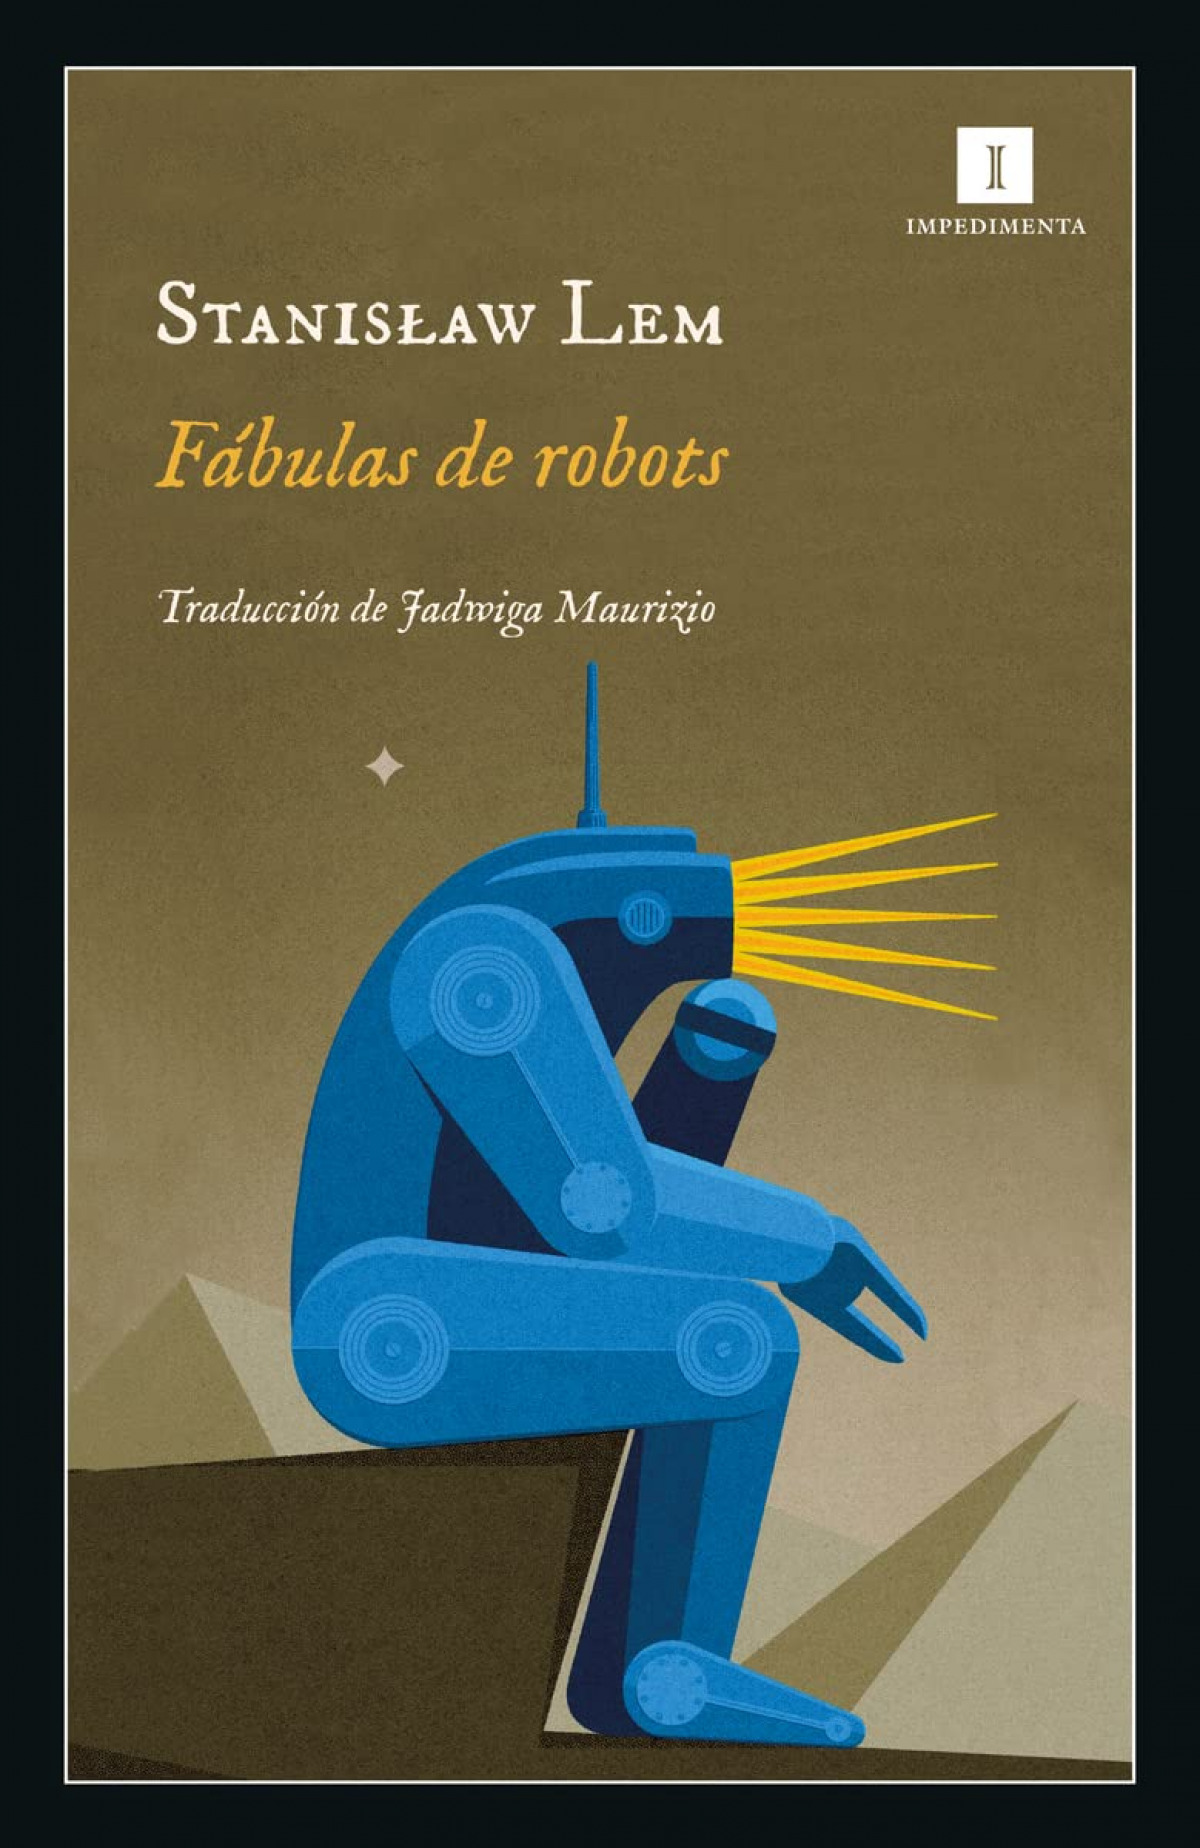 Fables For Robots